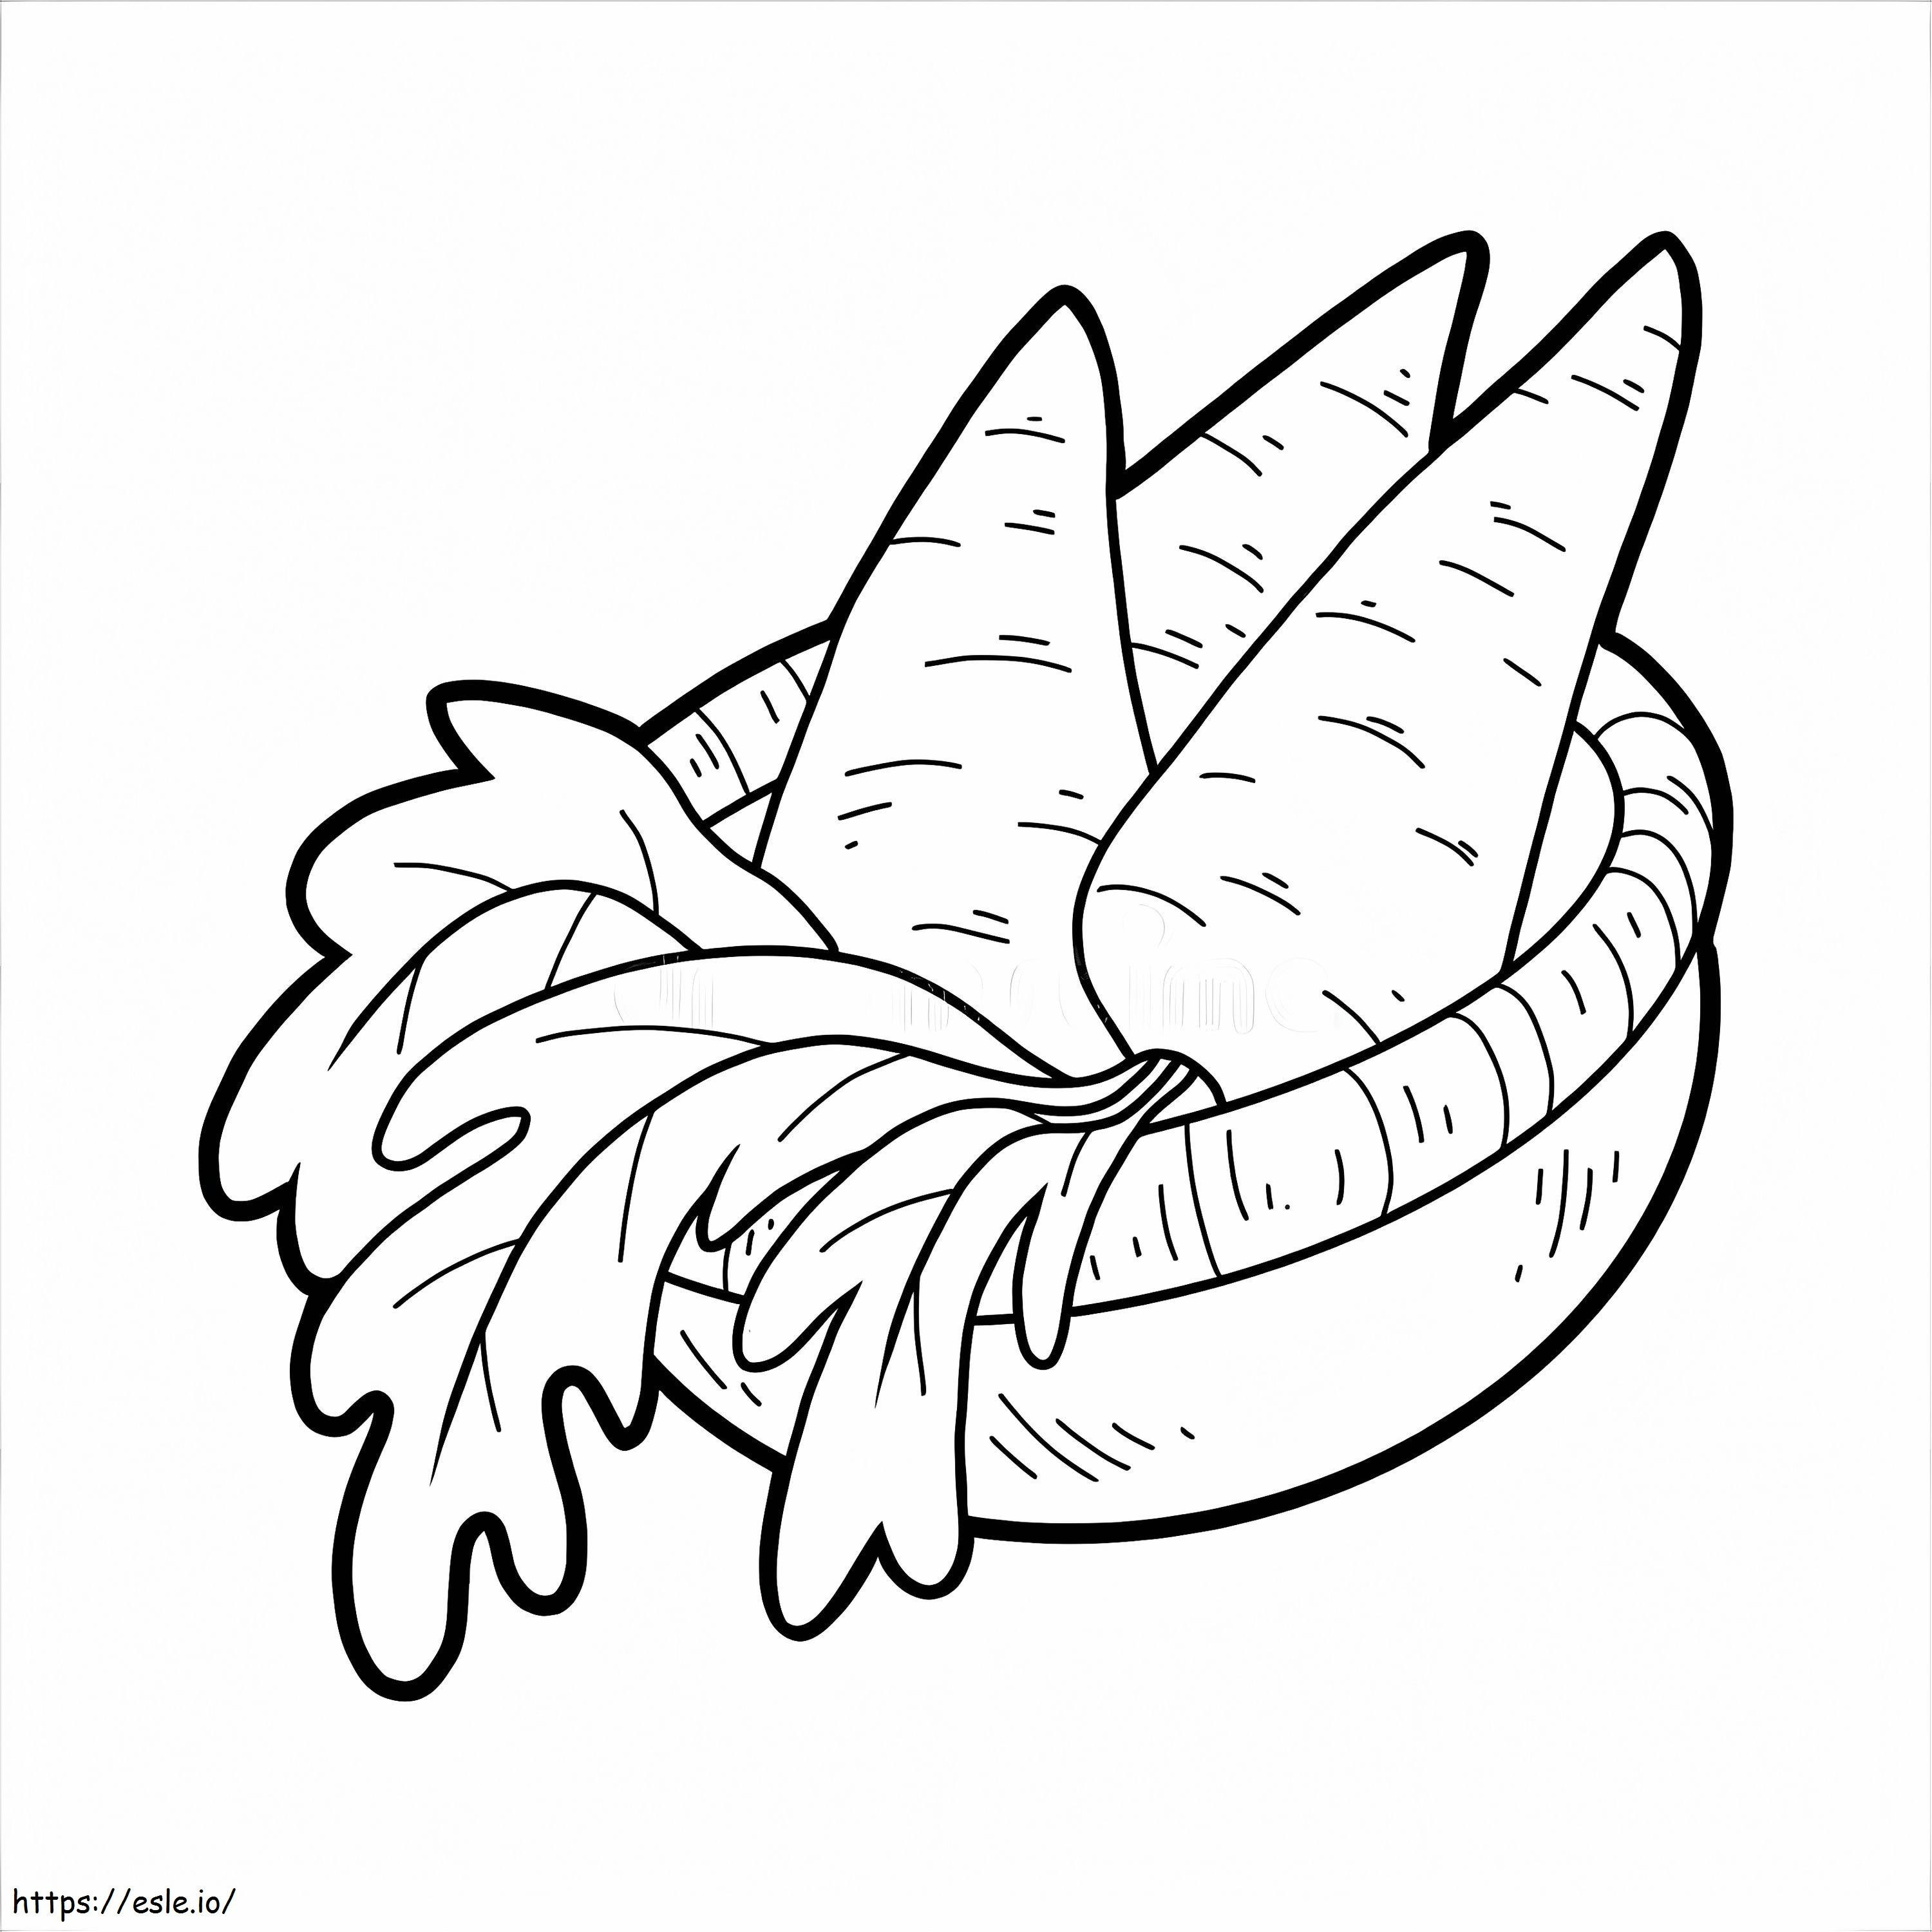 The Carrots Are In The Basket coloring page